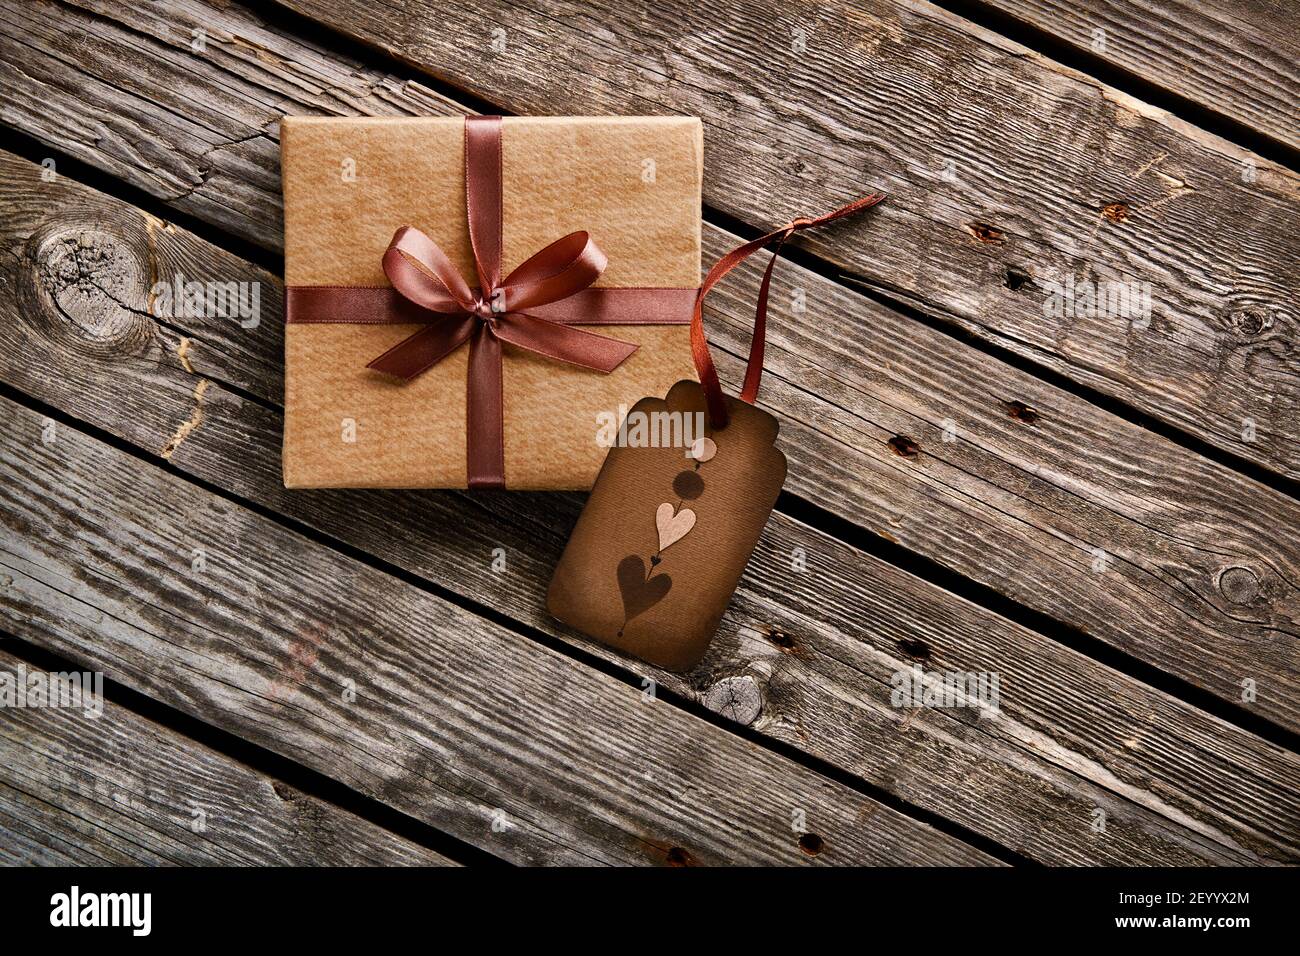 Vintage gift box with tag hearts Stock Photo